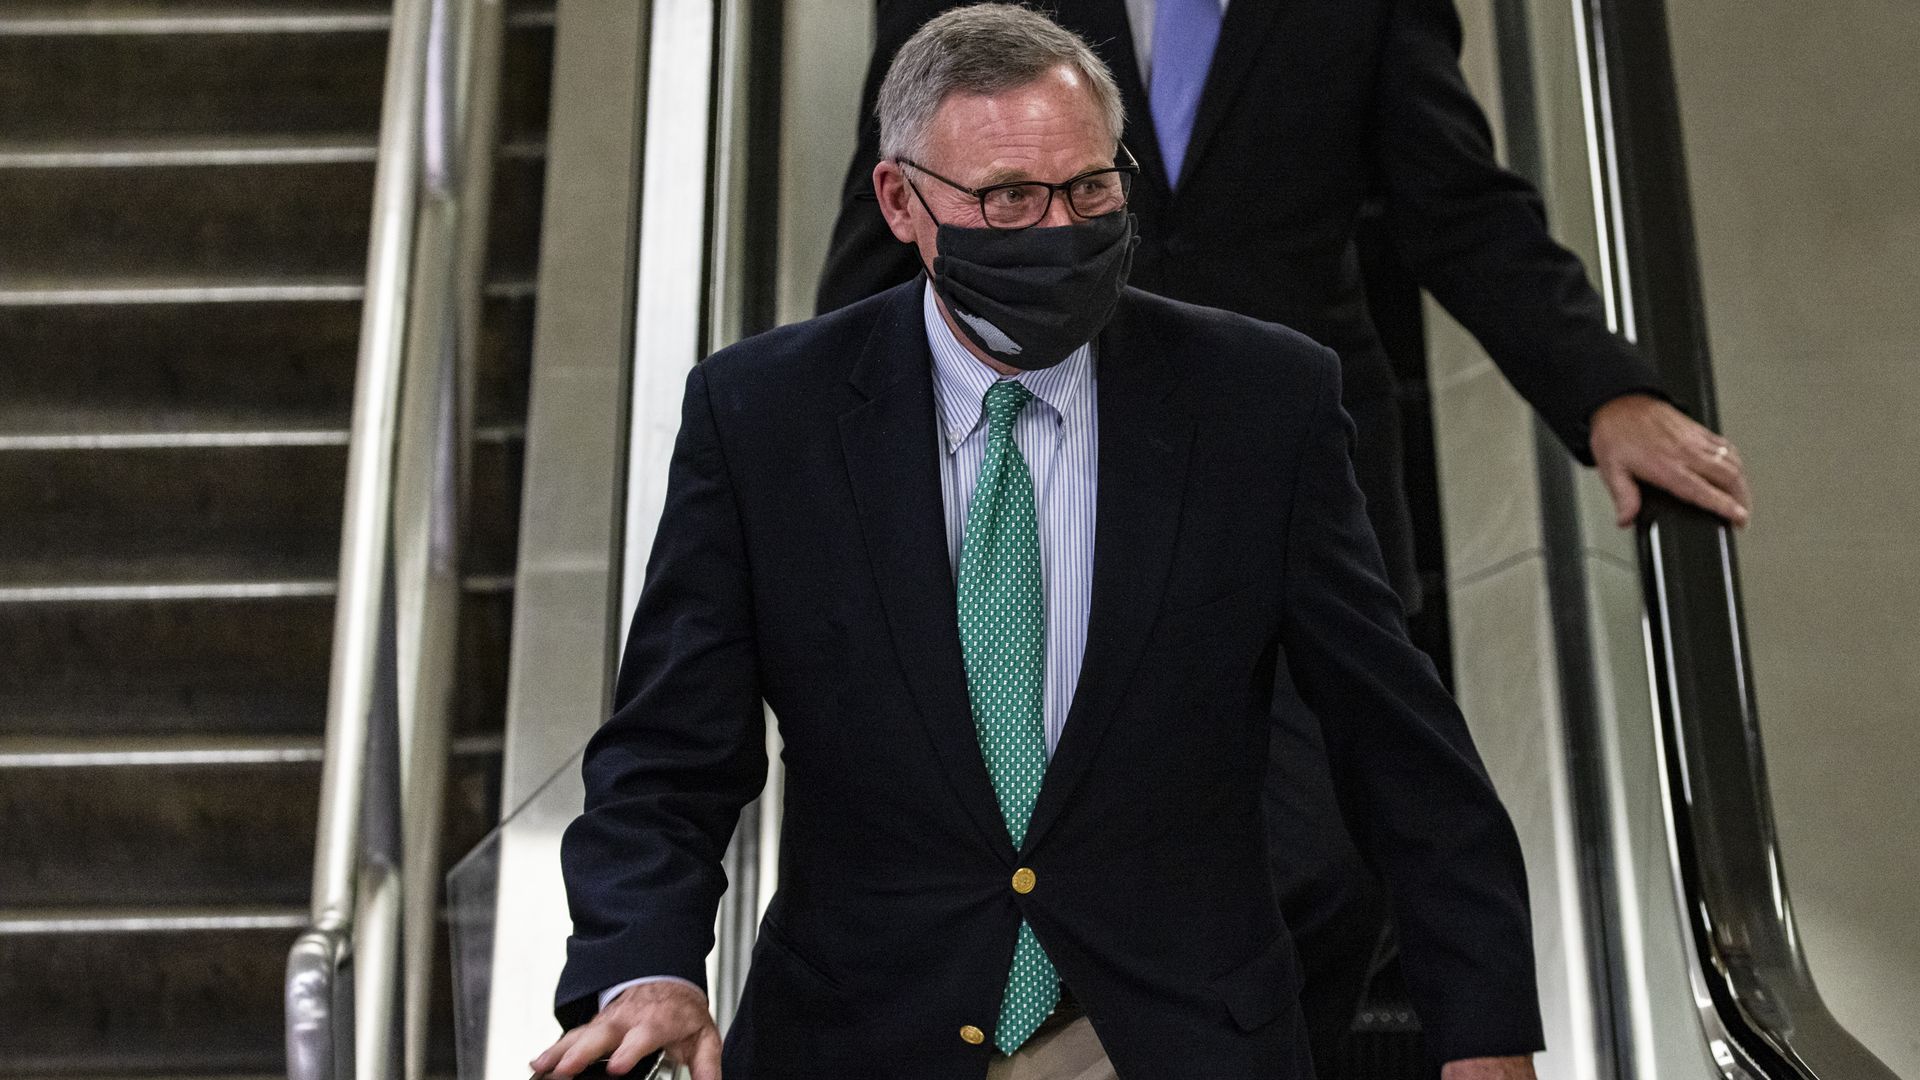 Richard Burr uses an escalator while wearing a face mask and a suit and tie